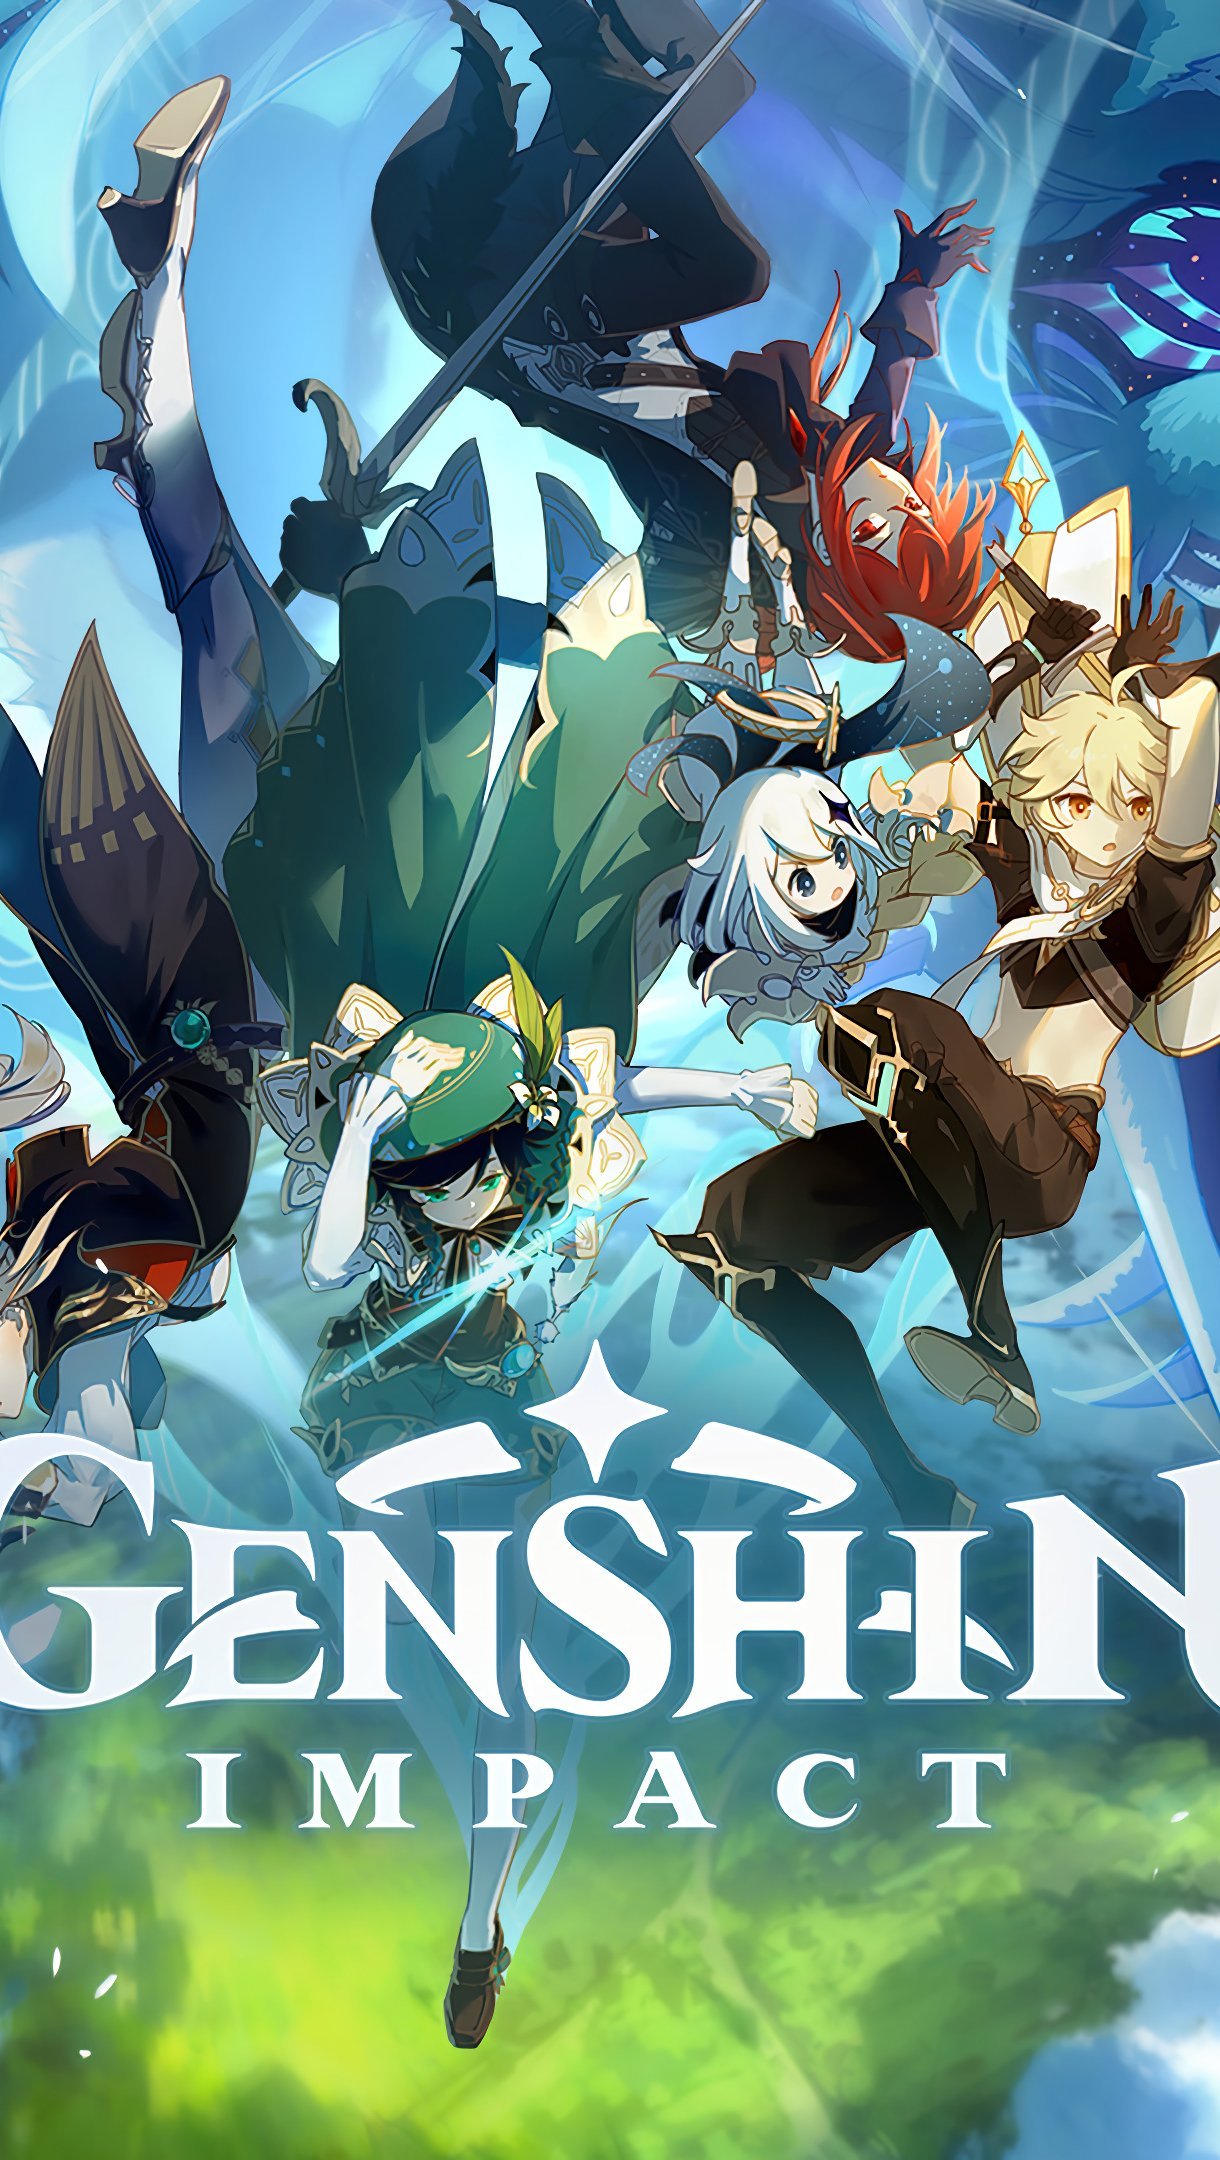 Review of Genshin Impact (for PC)